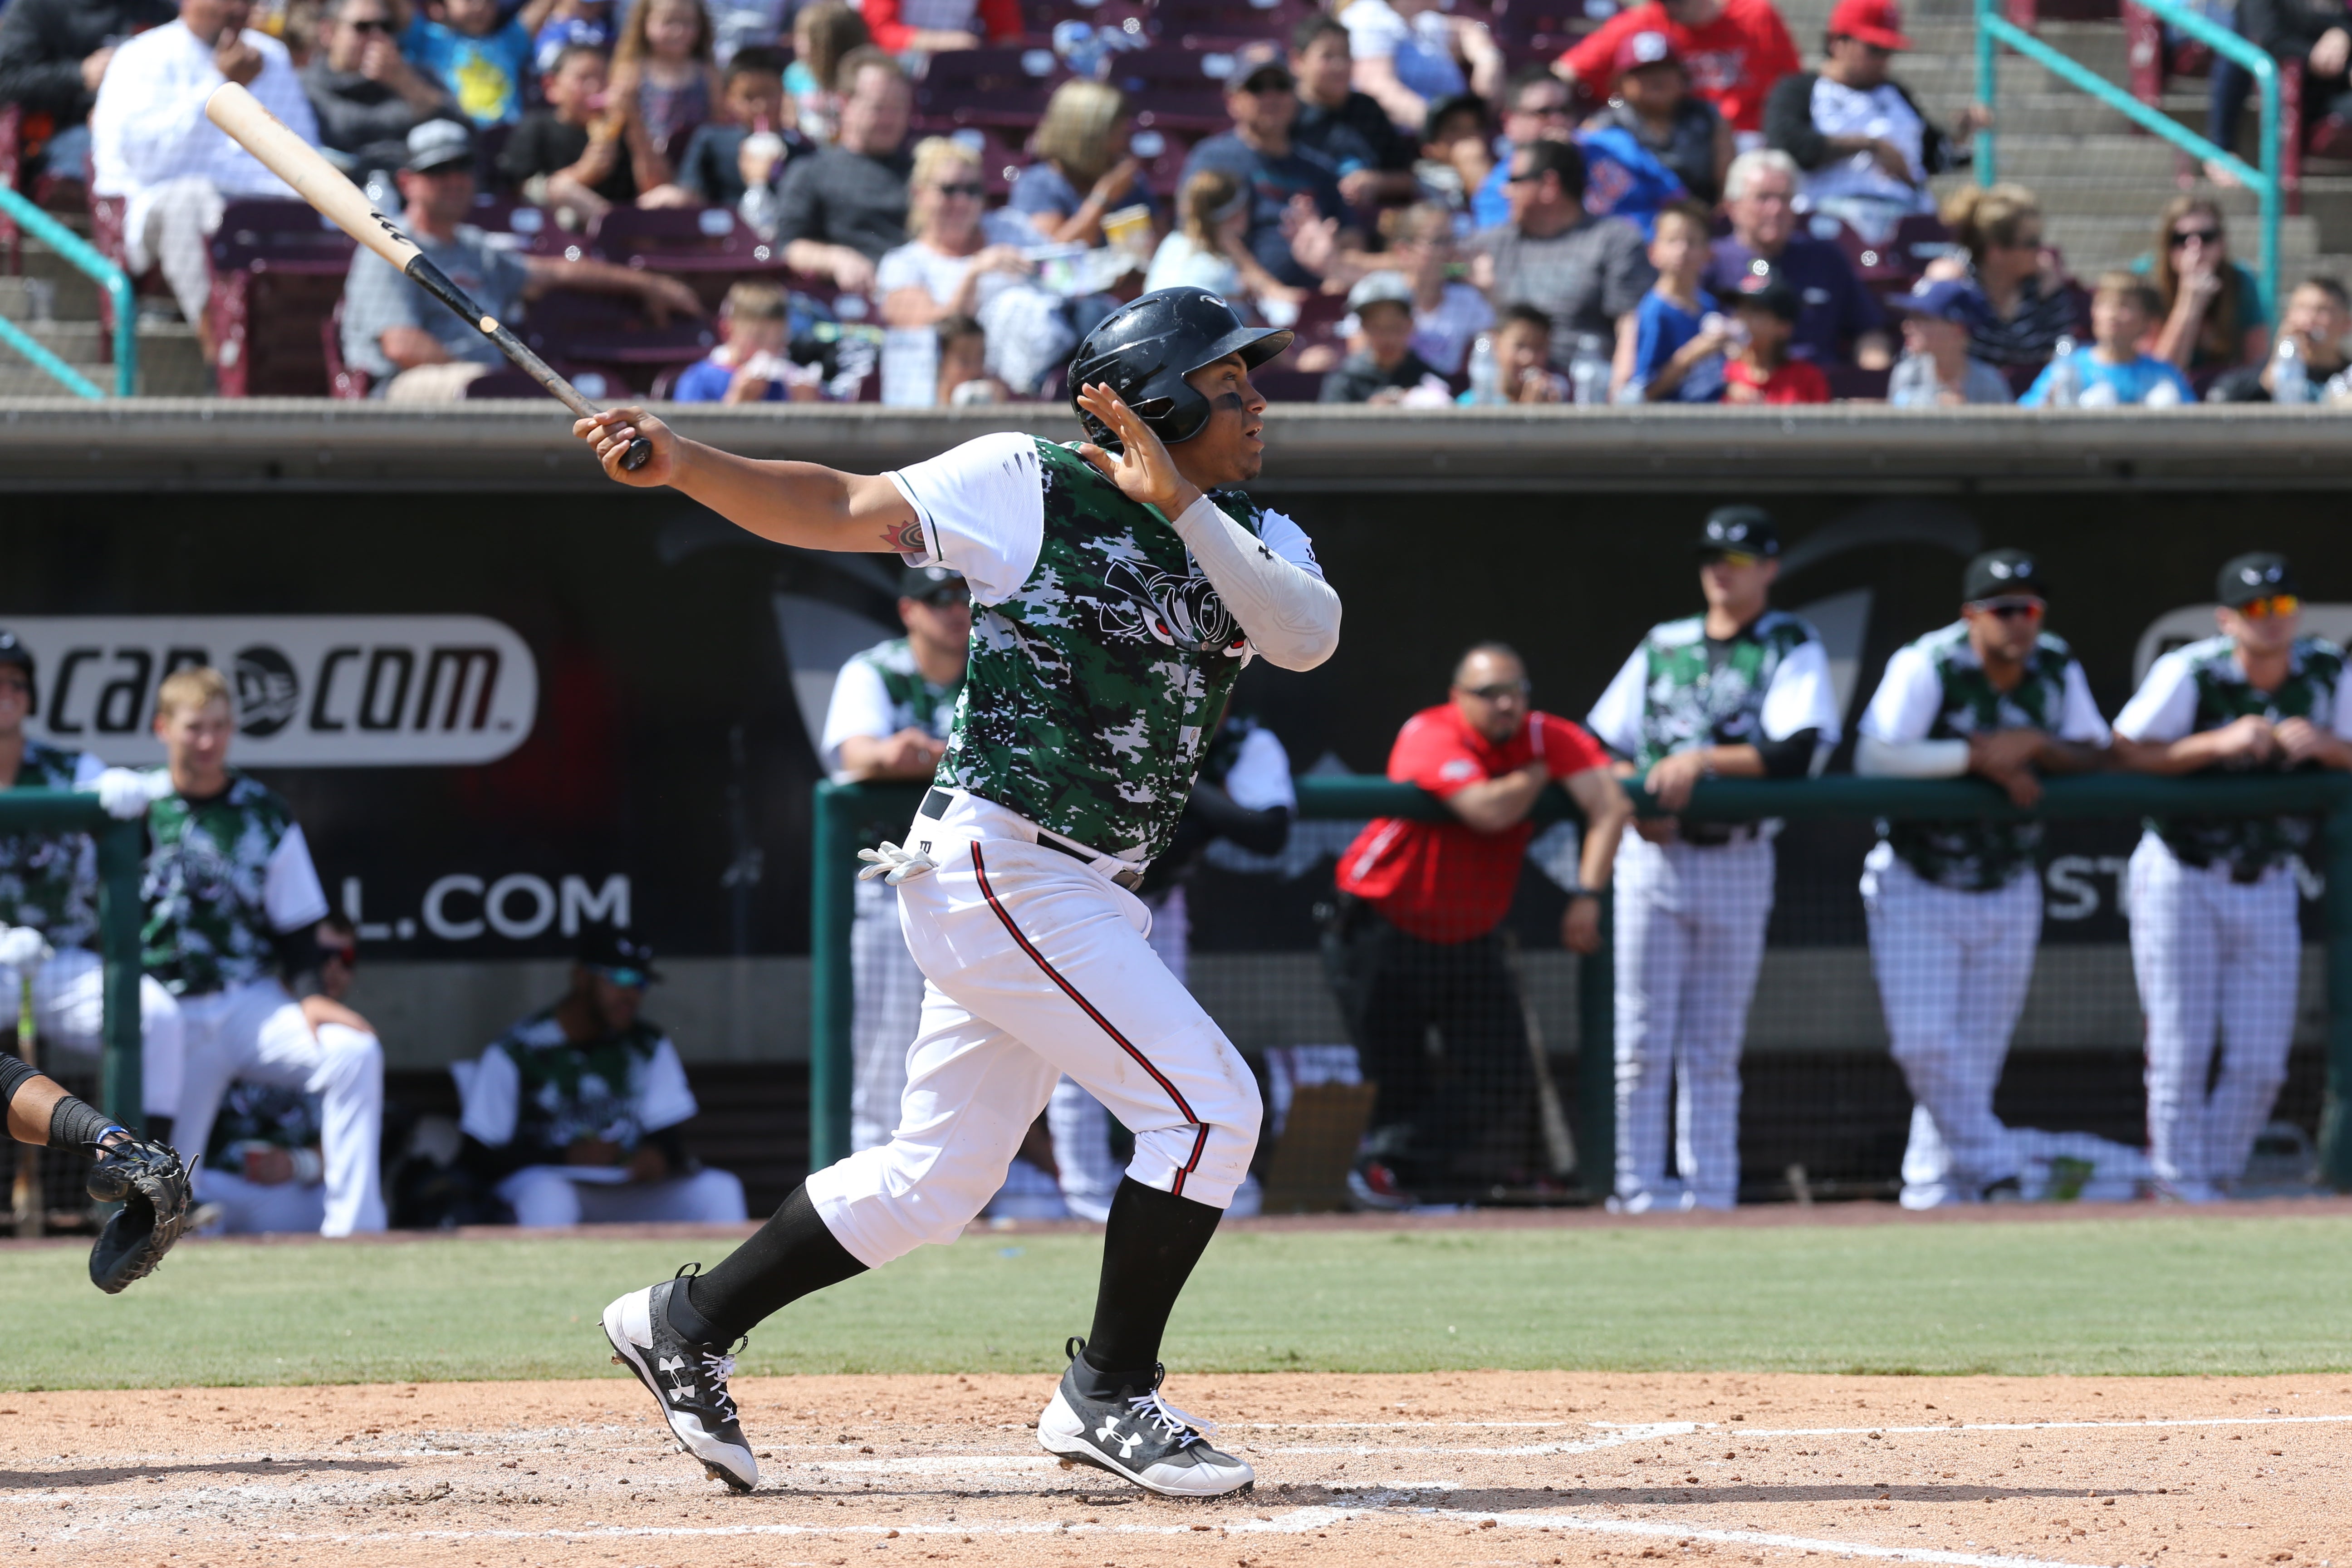 Farm Report: It was a winless Monday night for the Salt Lake Bees